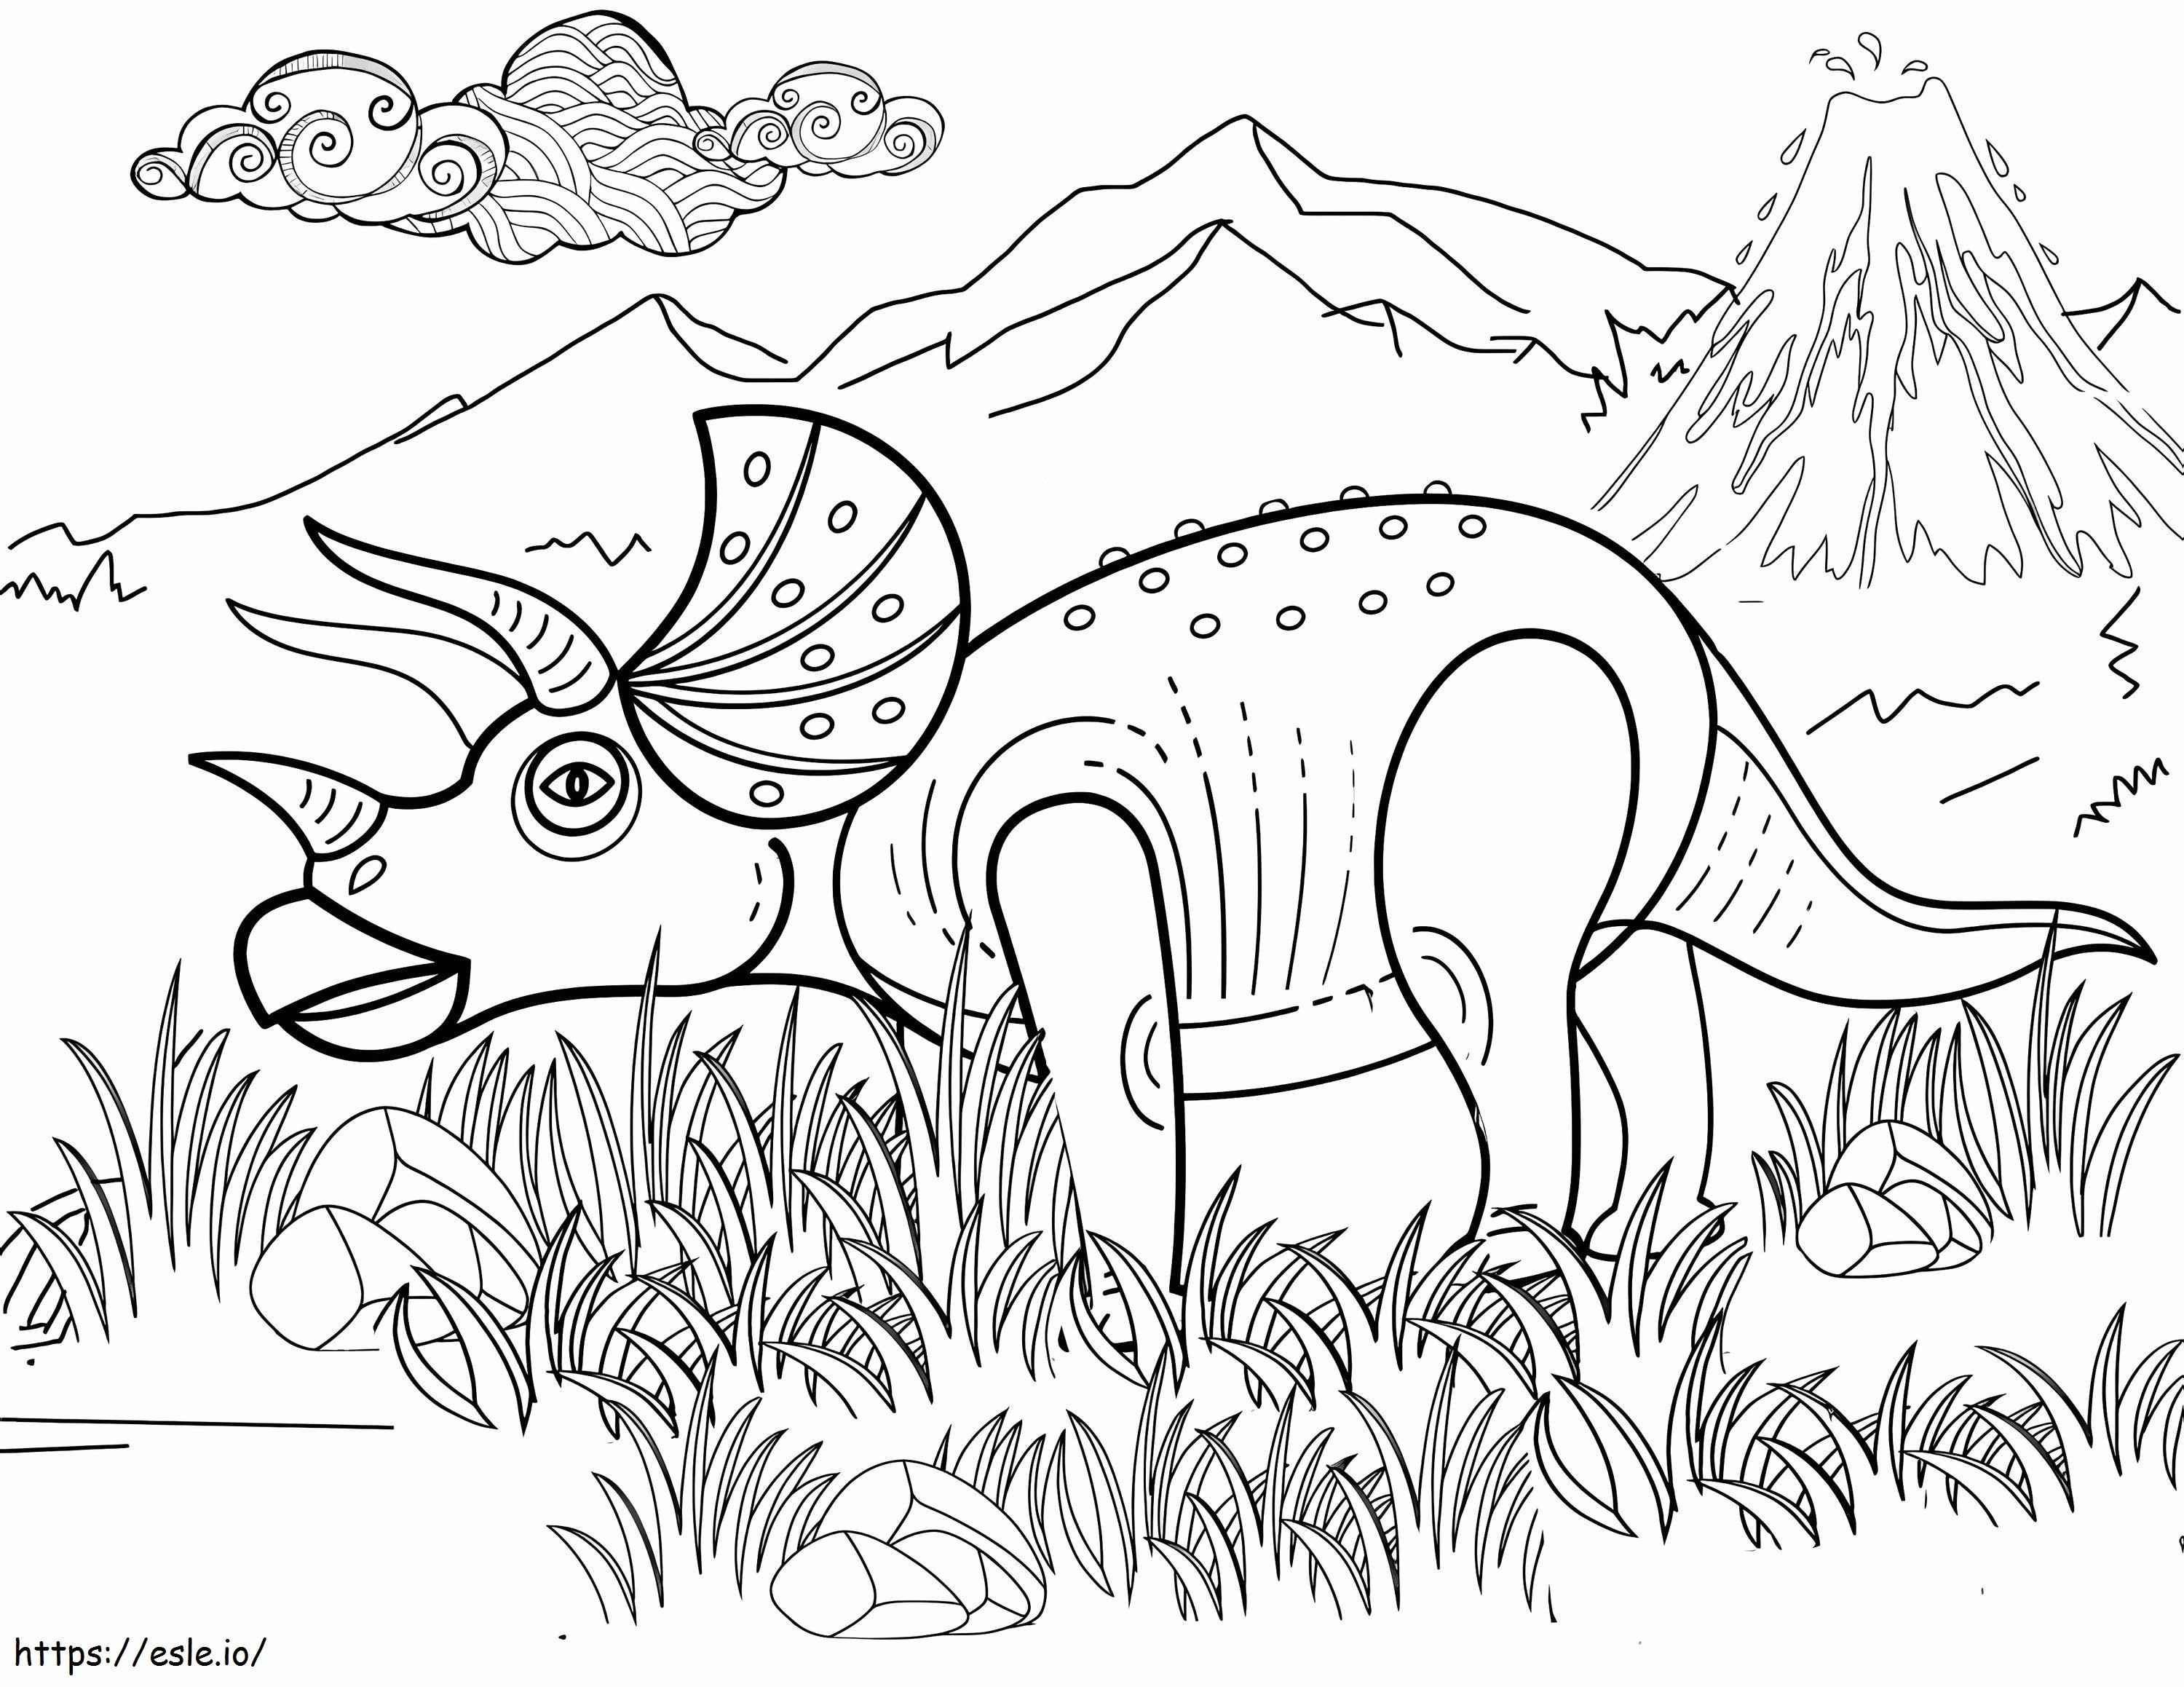 Triceratop On Grass coloring page